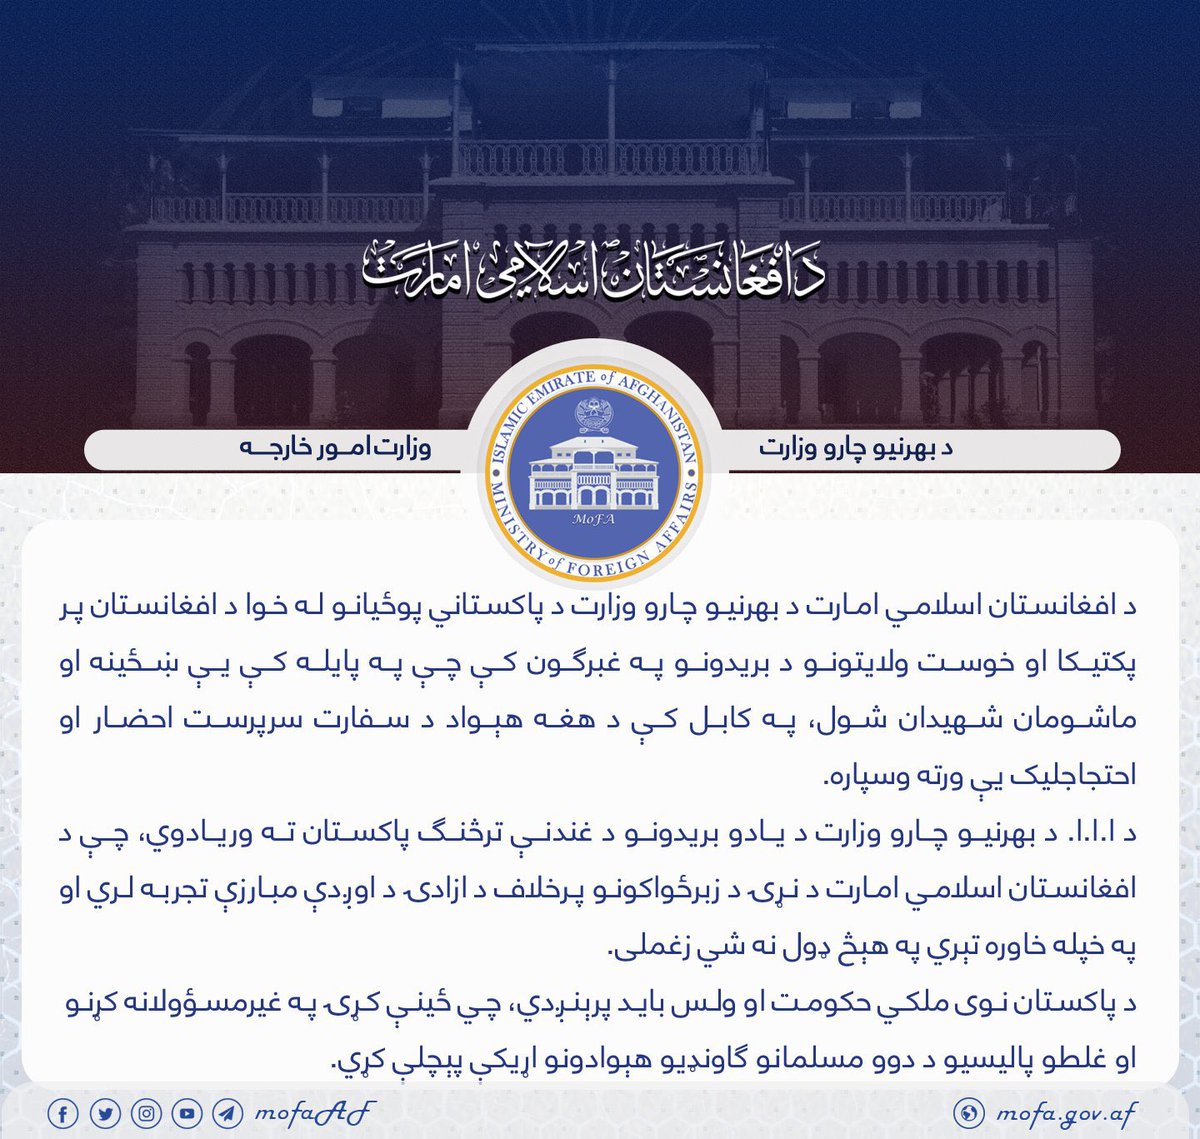 IEA summoned Pakistan ambassador to Kabul over Paktika and Khost air strikes. The statement says “Islamic Emirate of Afghanistan has a long experience of fighting for freedom against the superpowers of the world and cannot tolerate aggression on its territory in any ways.”